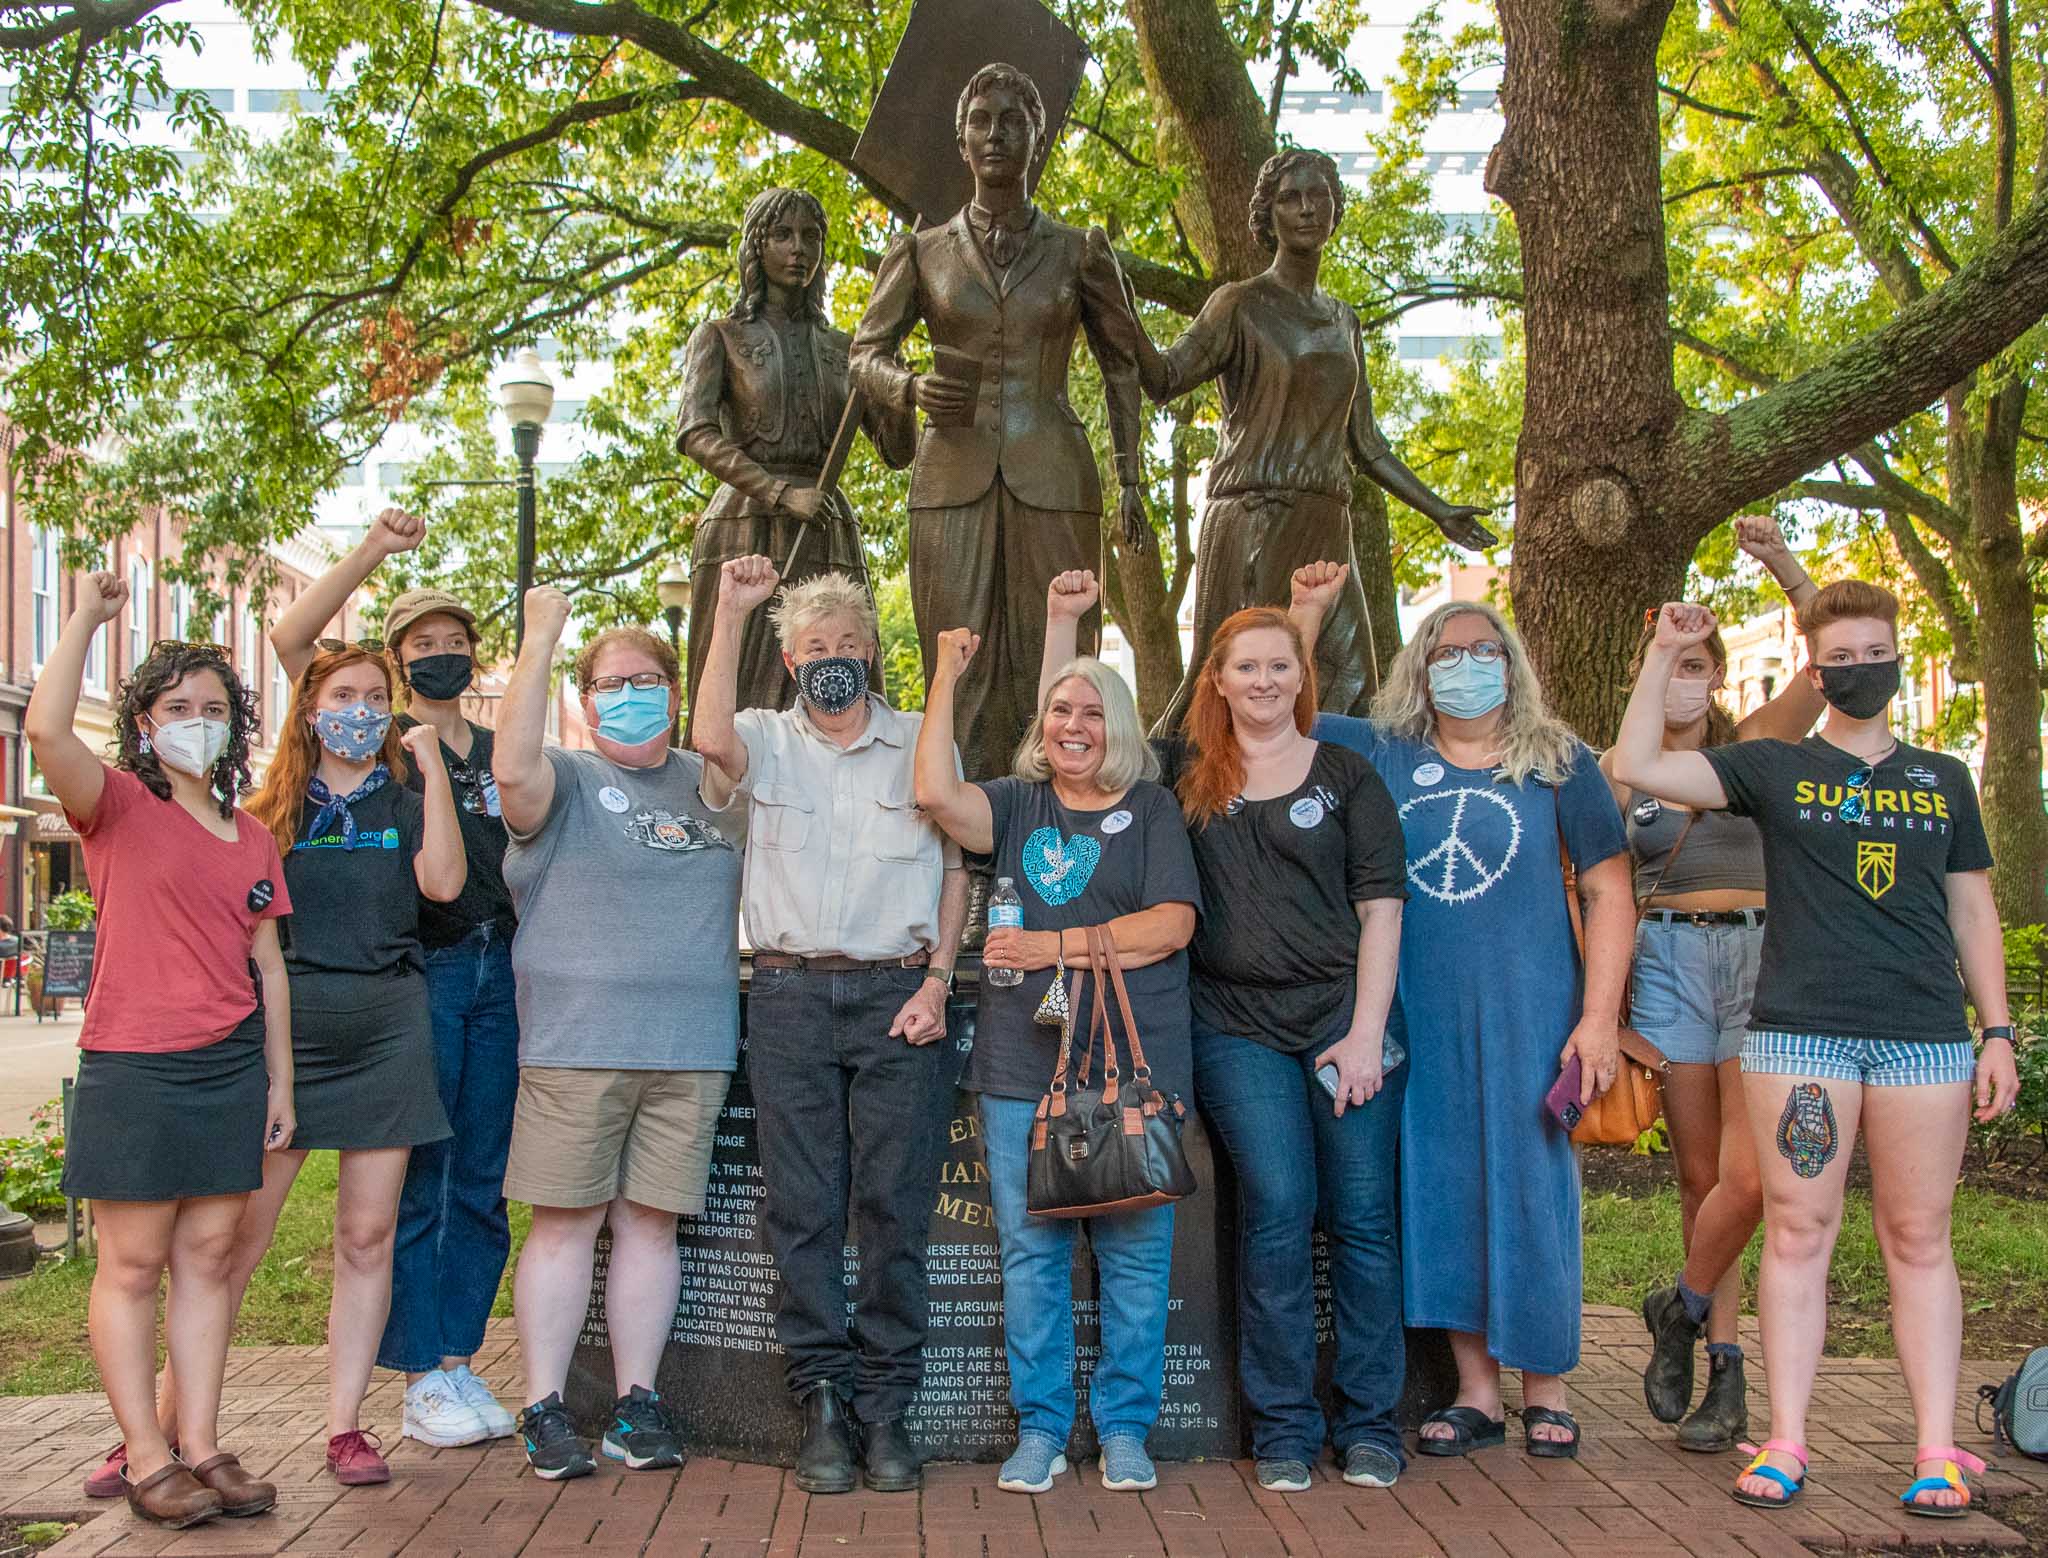 10 people raise their fists in front of a bronze statue